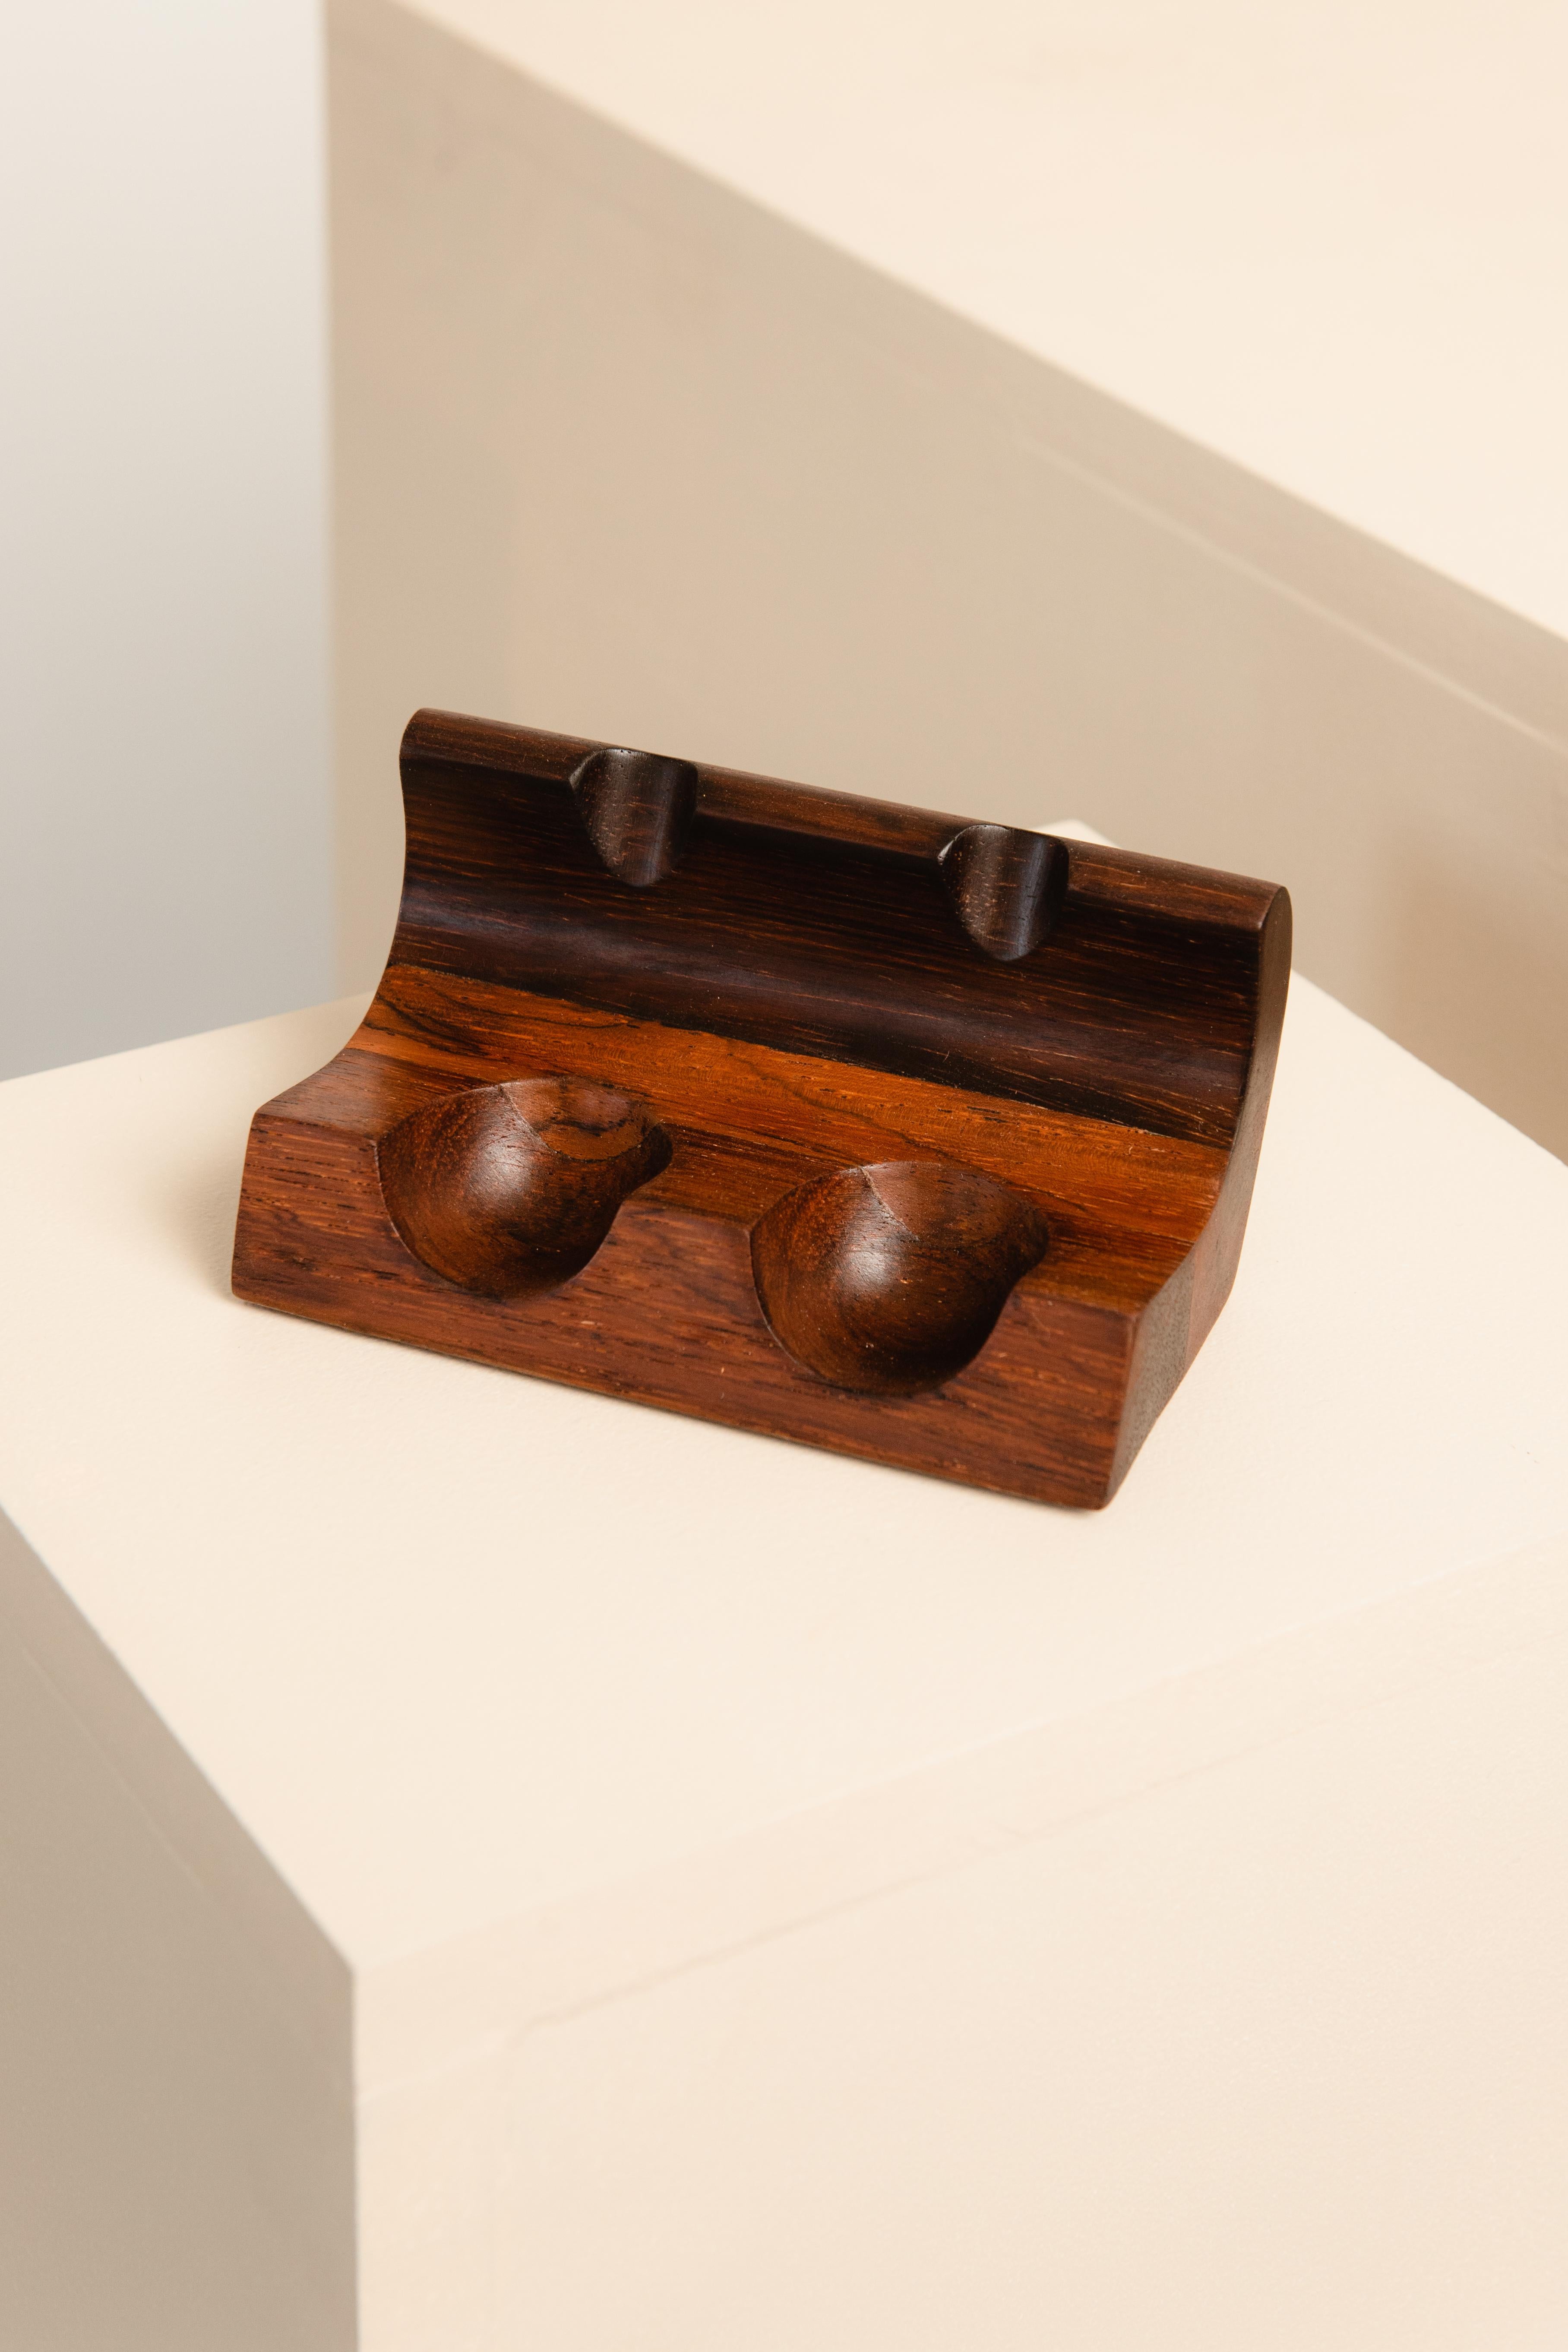 Solid rosewood pipe holder by Jean Gillon model 822 from the WoodArt catalogue.

Jean Gillon (1919-2007) was born in Romania, where he graduated in Architecture and Fine Arts. In 1956 he moved to Brazil, where he developed his work in three